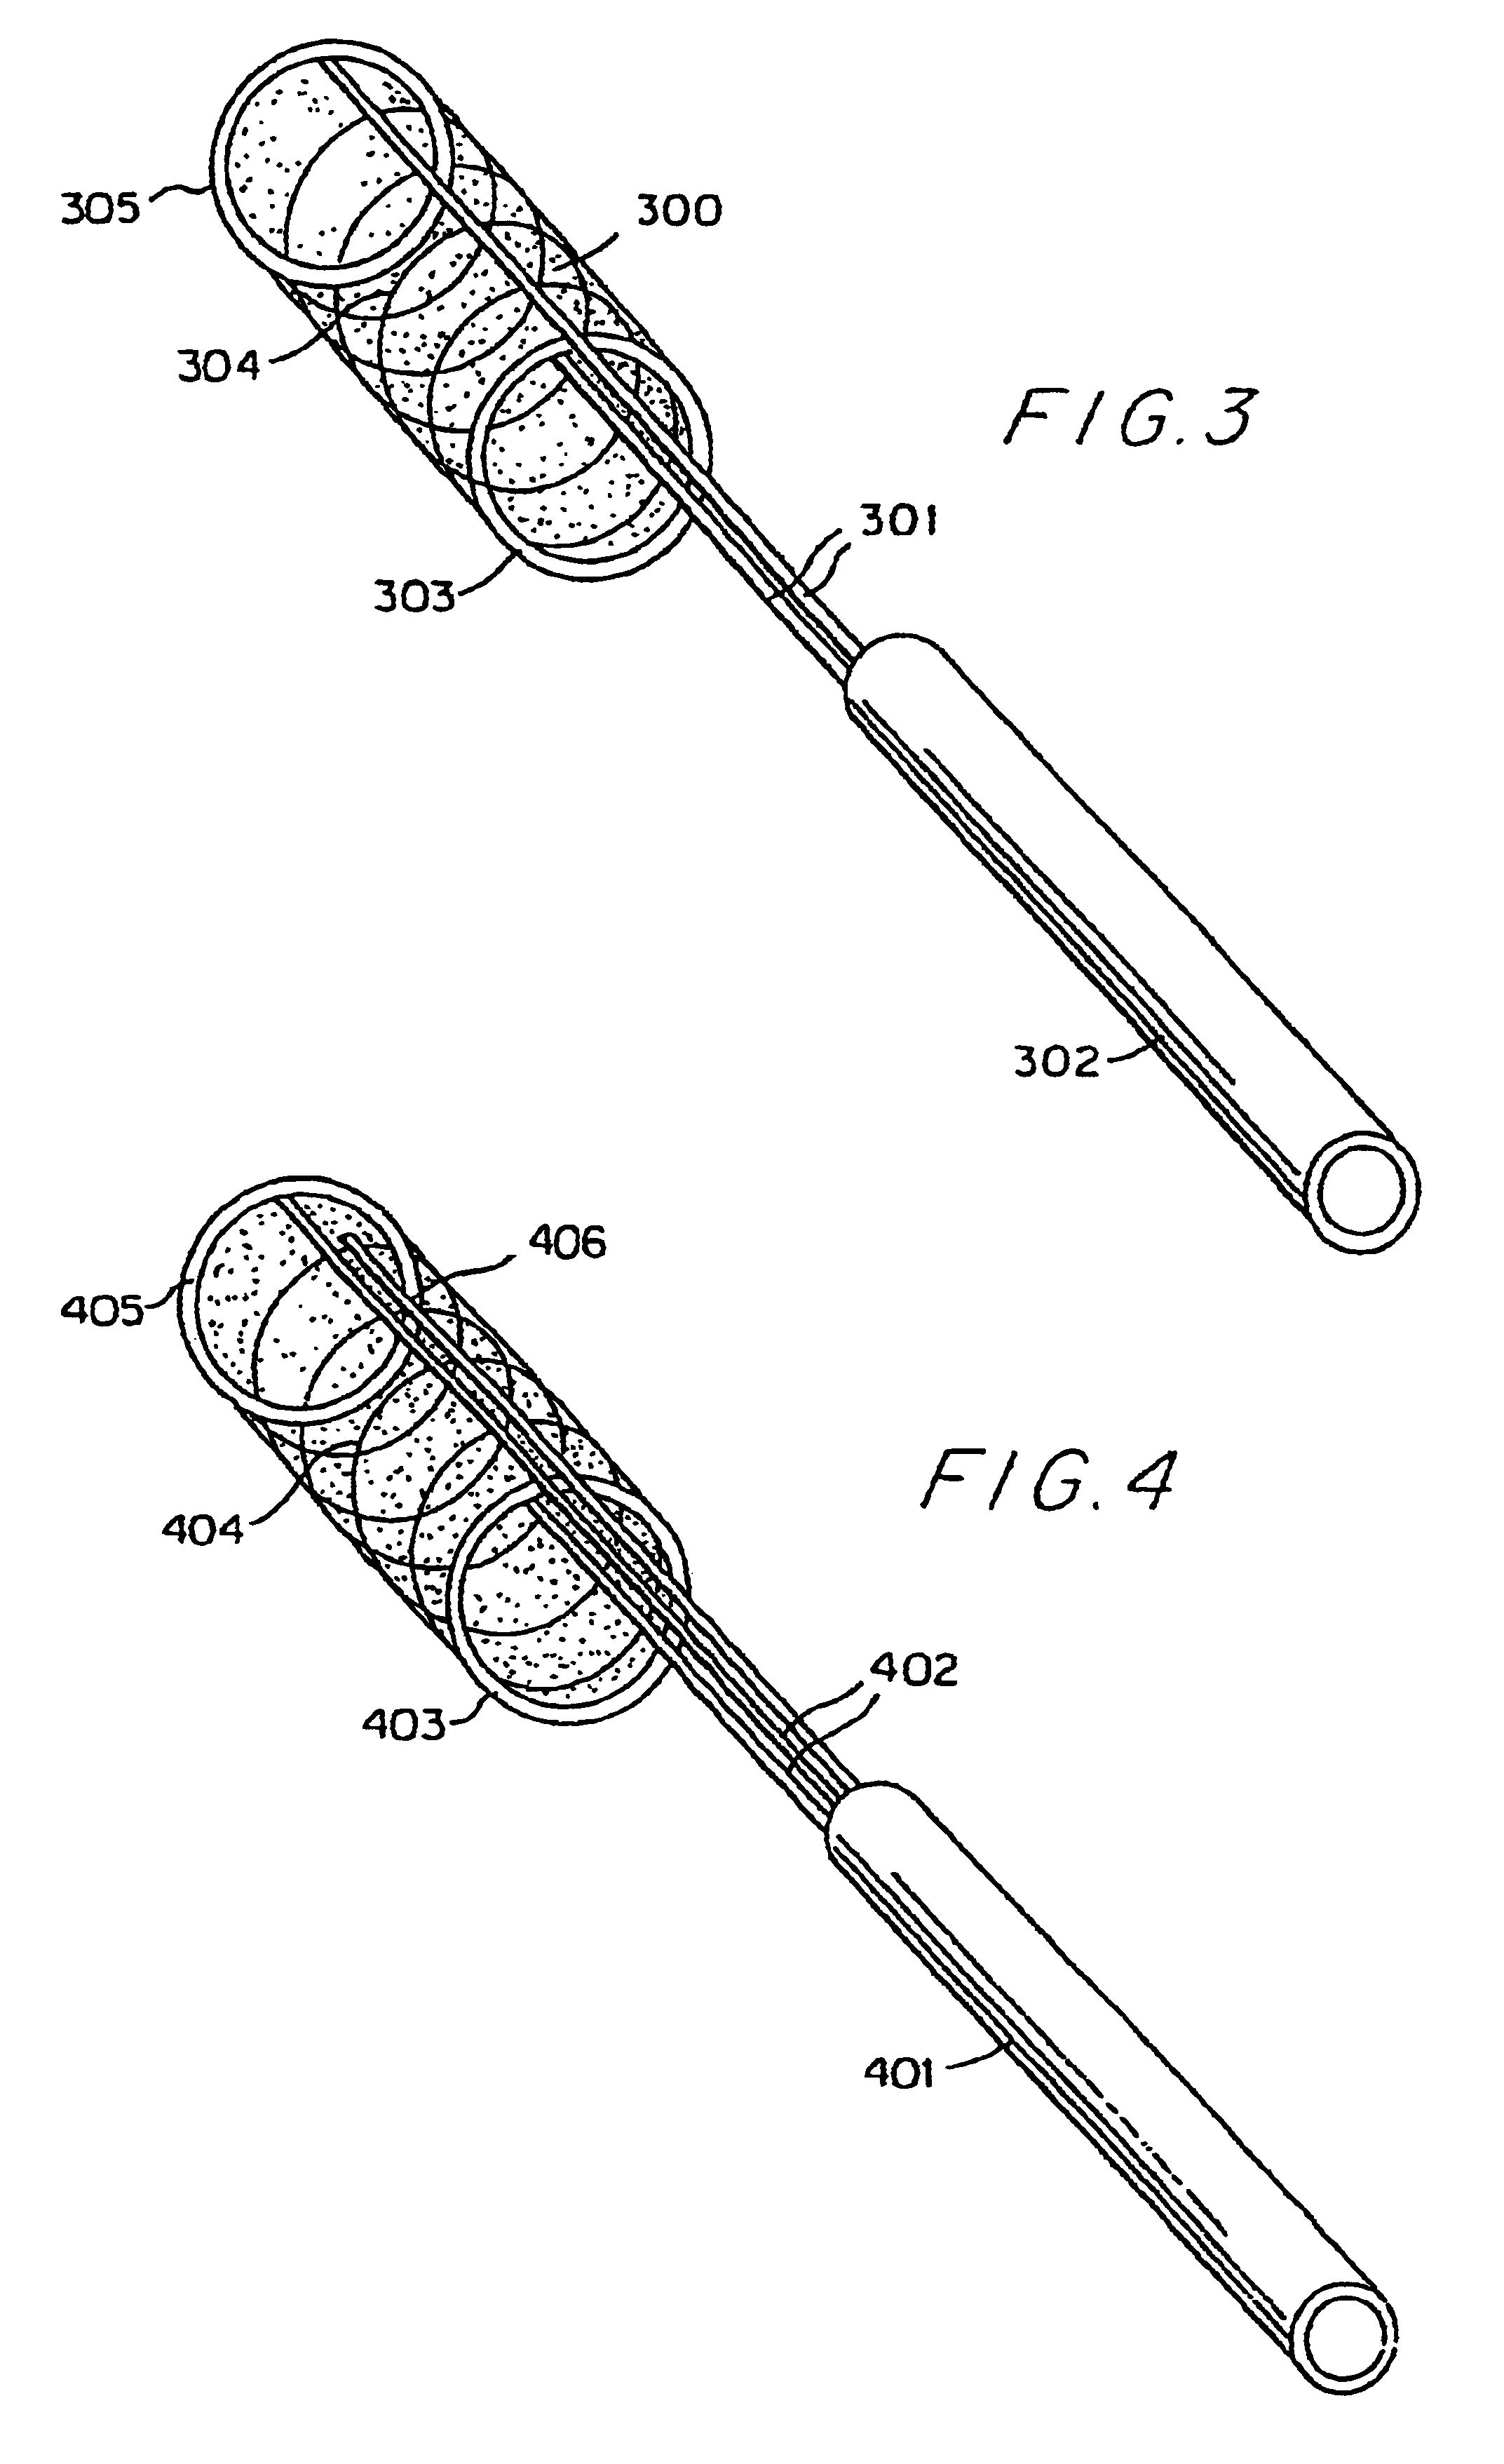 Endovascular thin film devices and methods for treating and preventing stroke